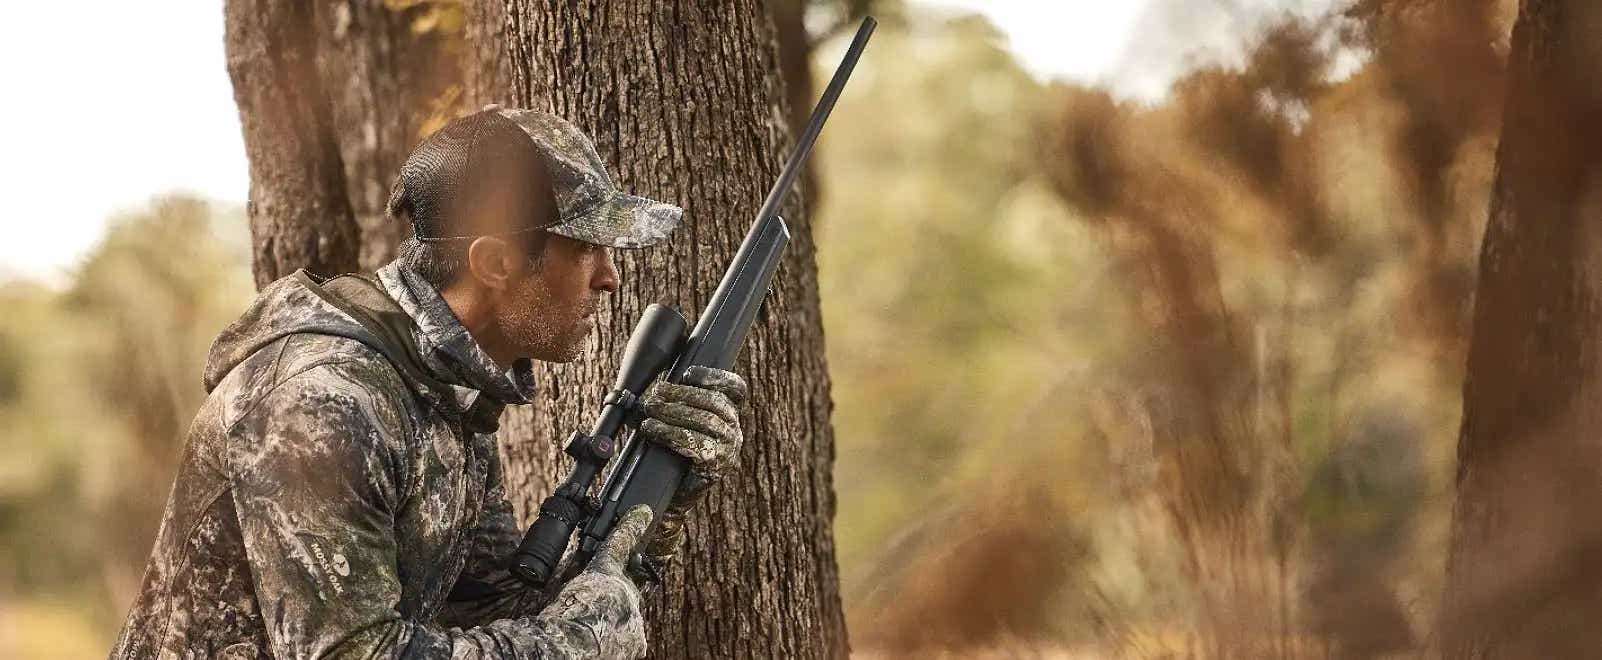 Hunter waits for his game with a rifle in hand